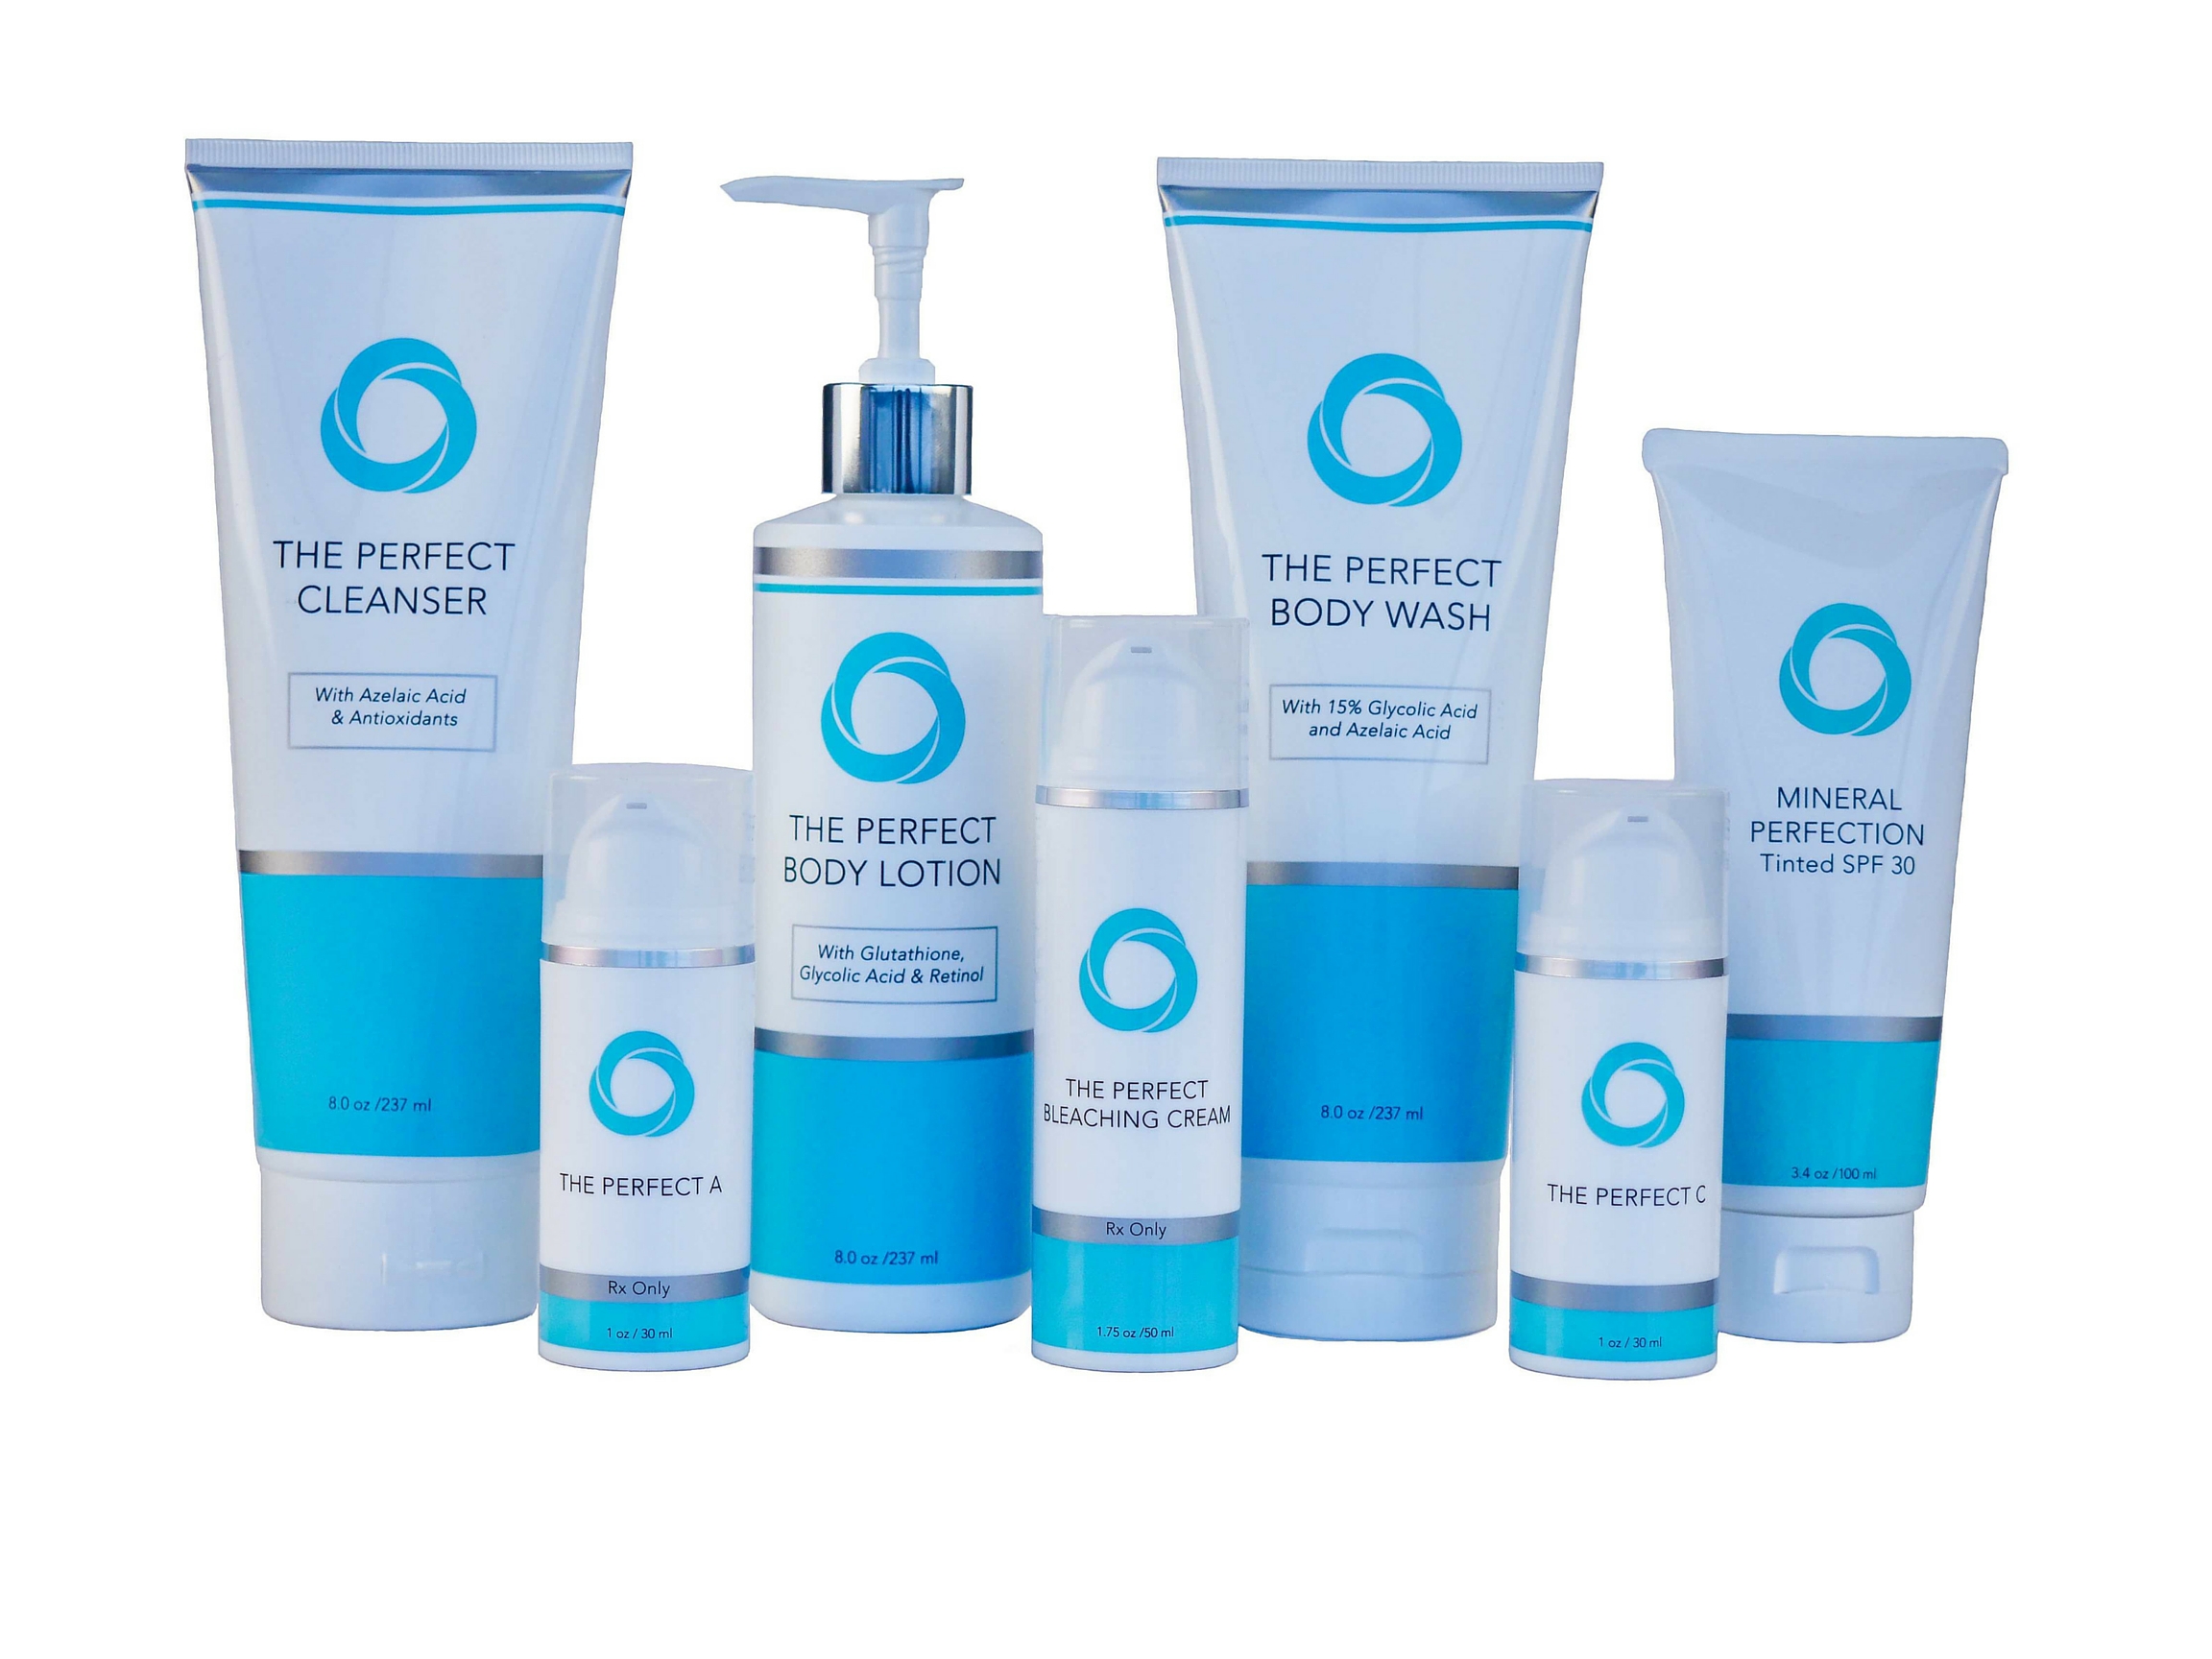 PERFECT SKINCARE WITH THE PERFECT SKIN CARE SYSTEM